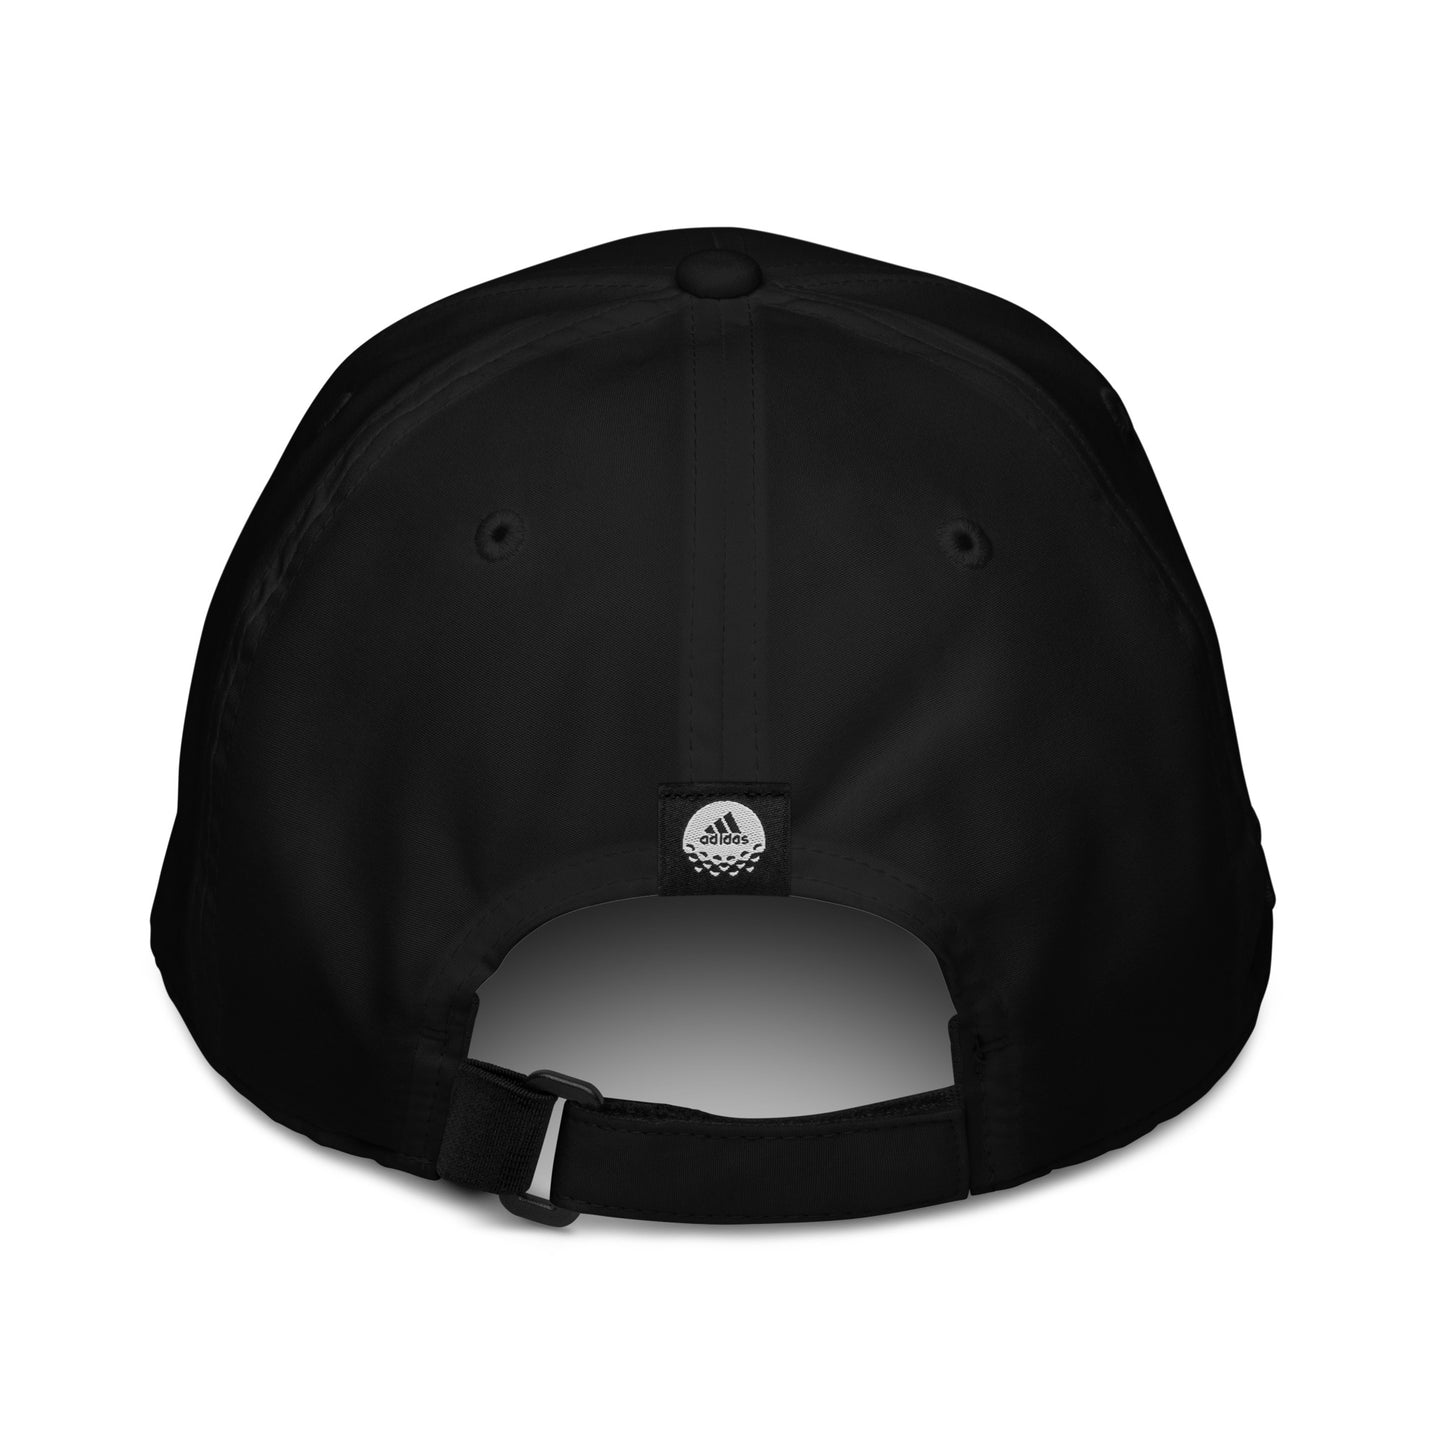 The spinner's cap - Adidas